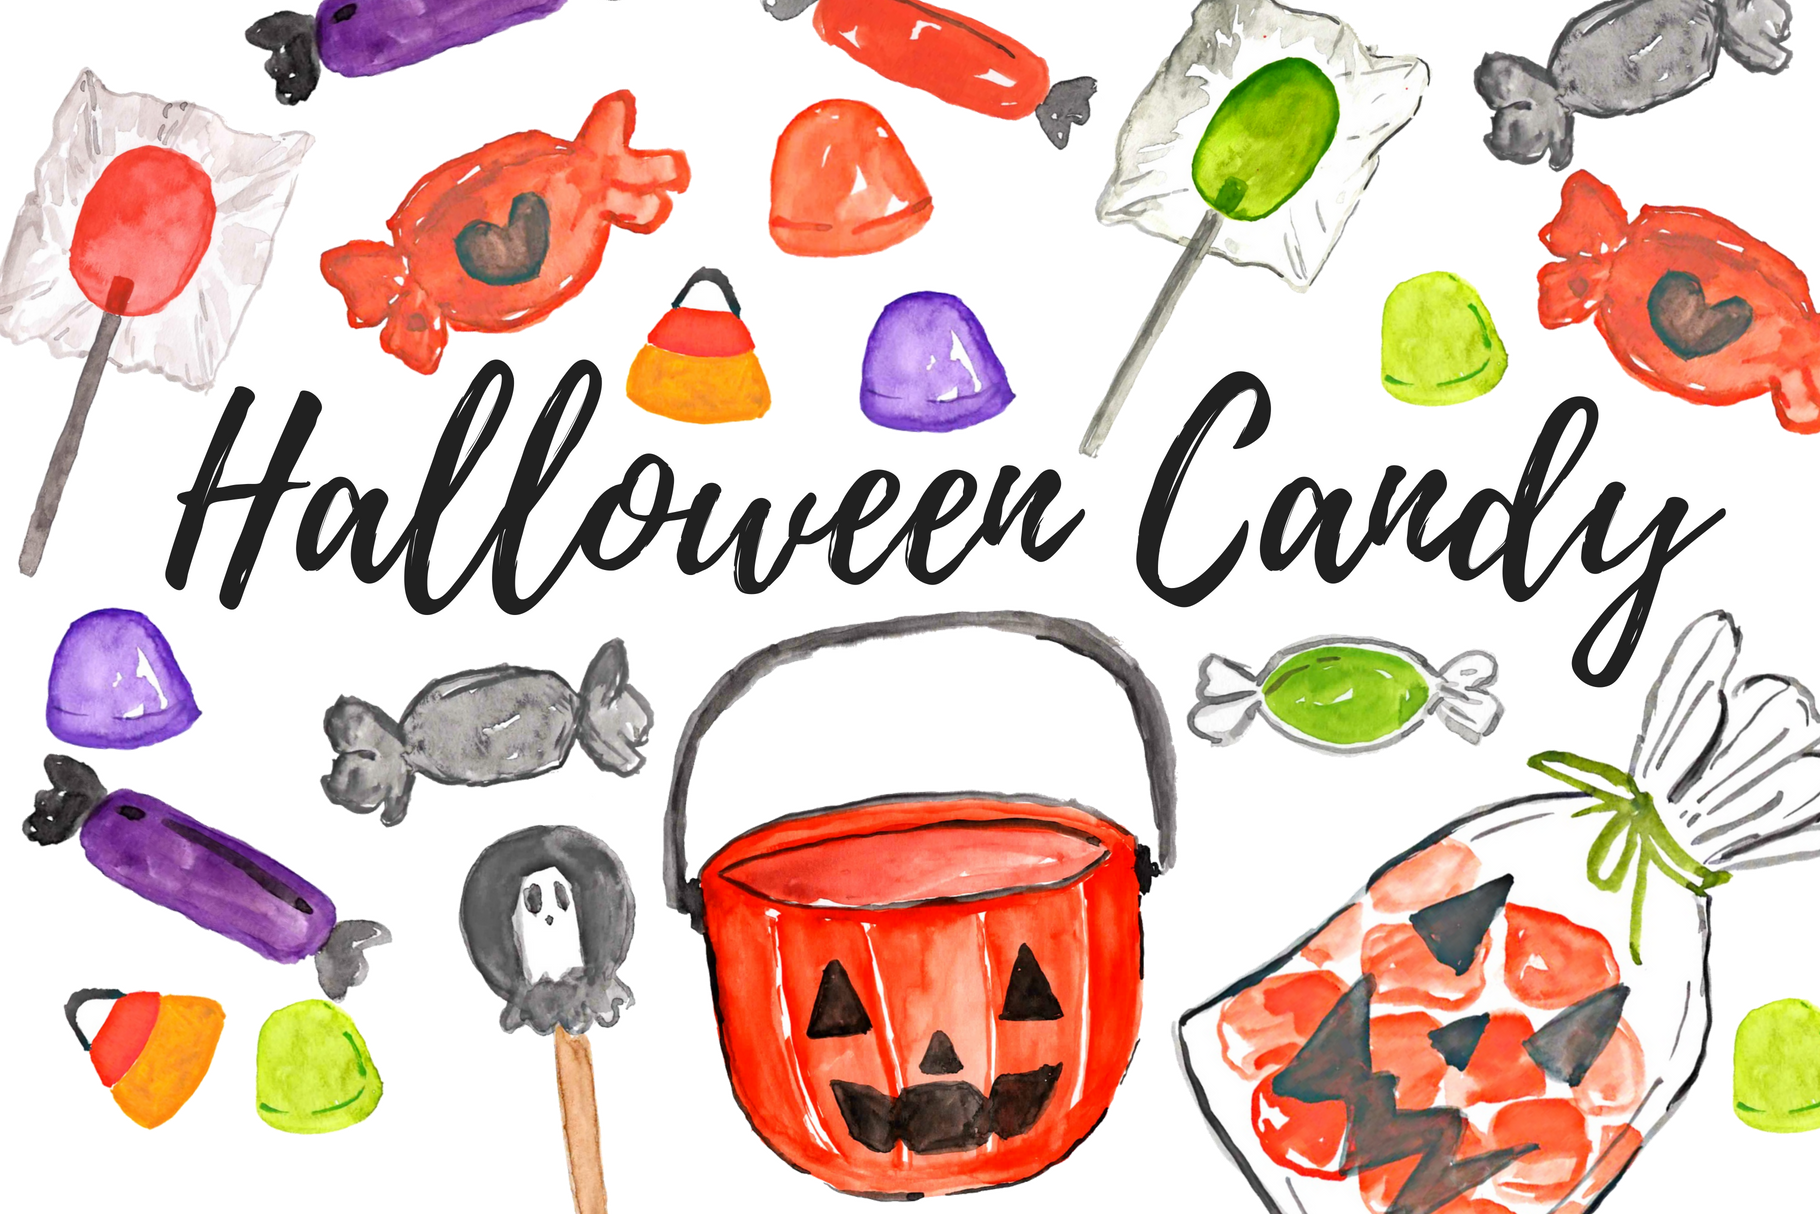 Watercolor Halloween Candy Clipart ~ Illustrations ...